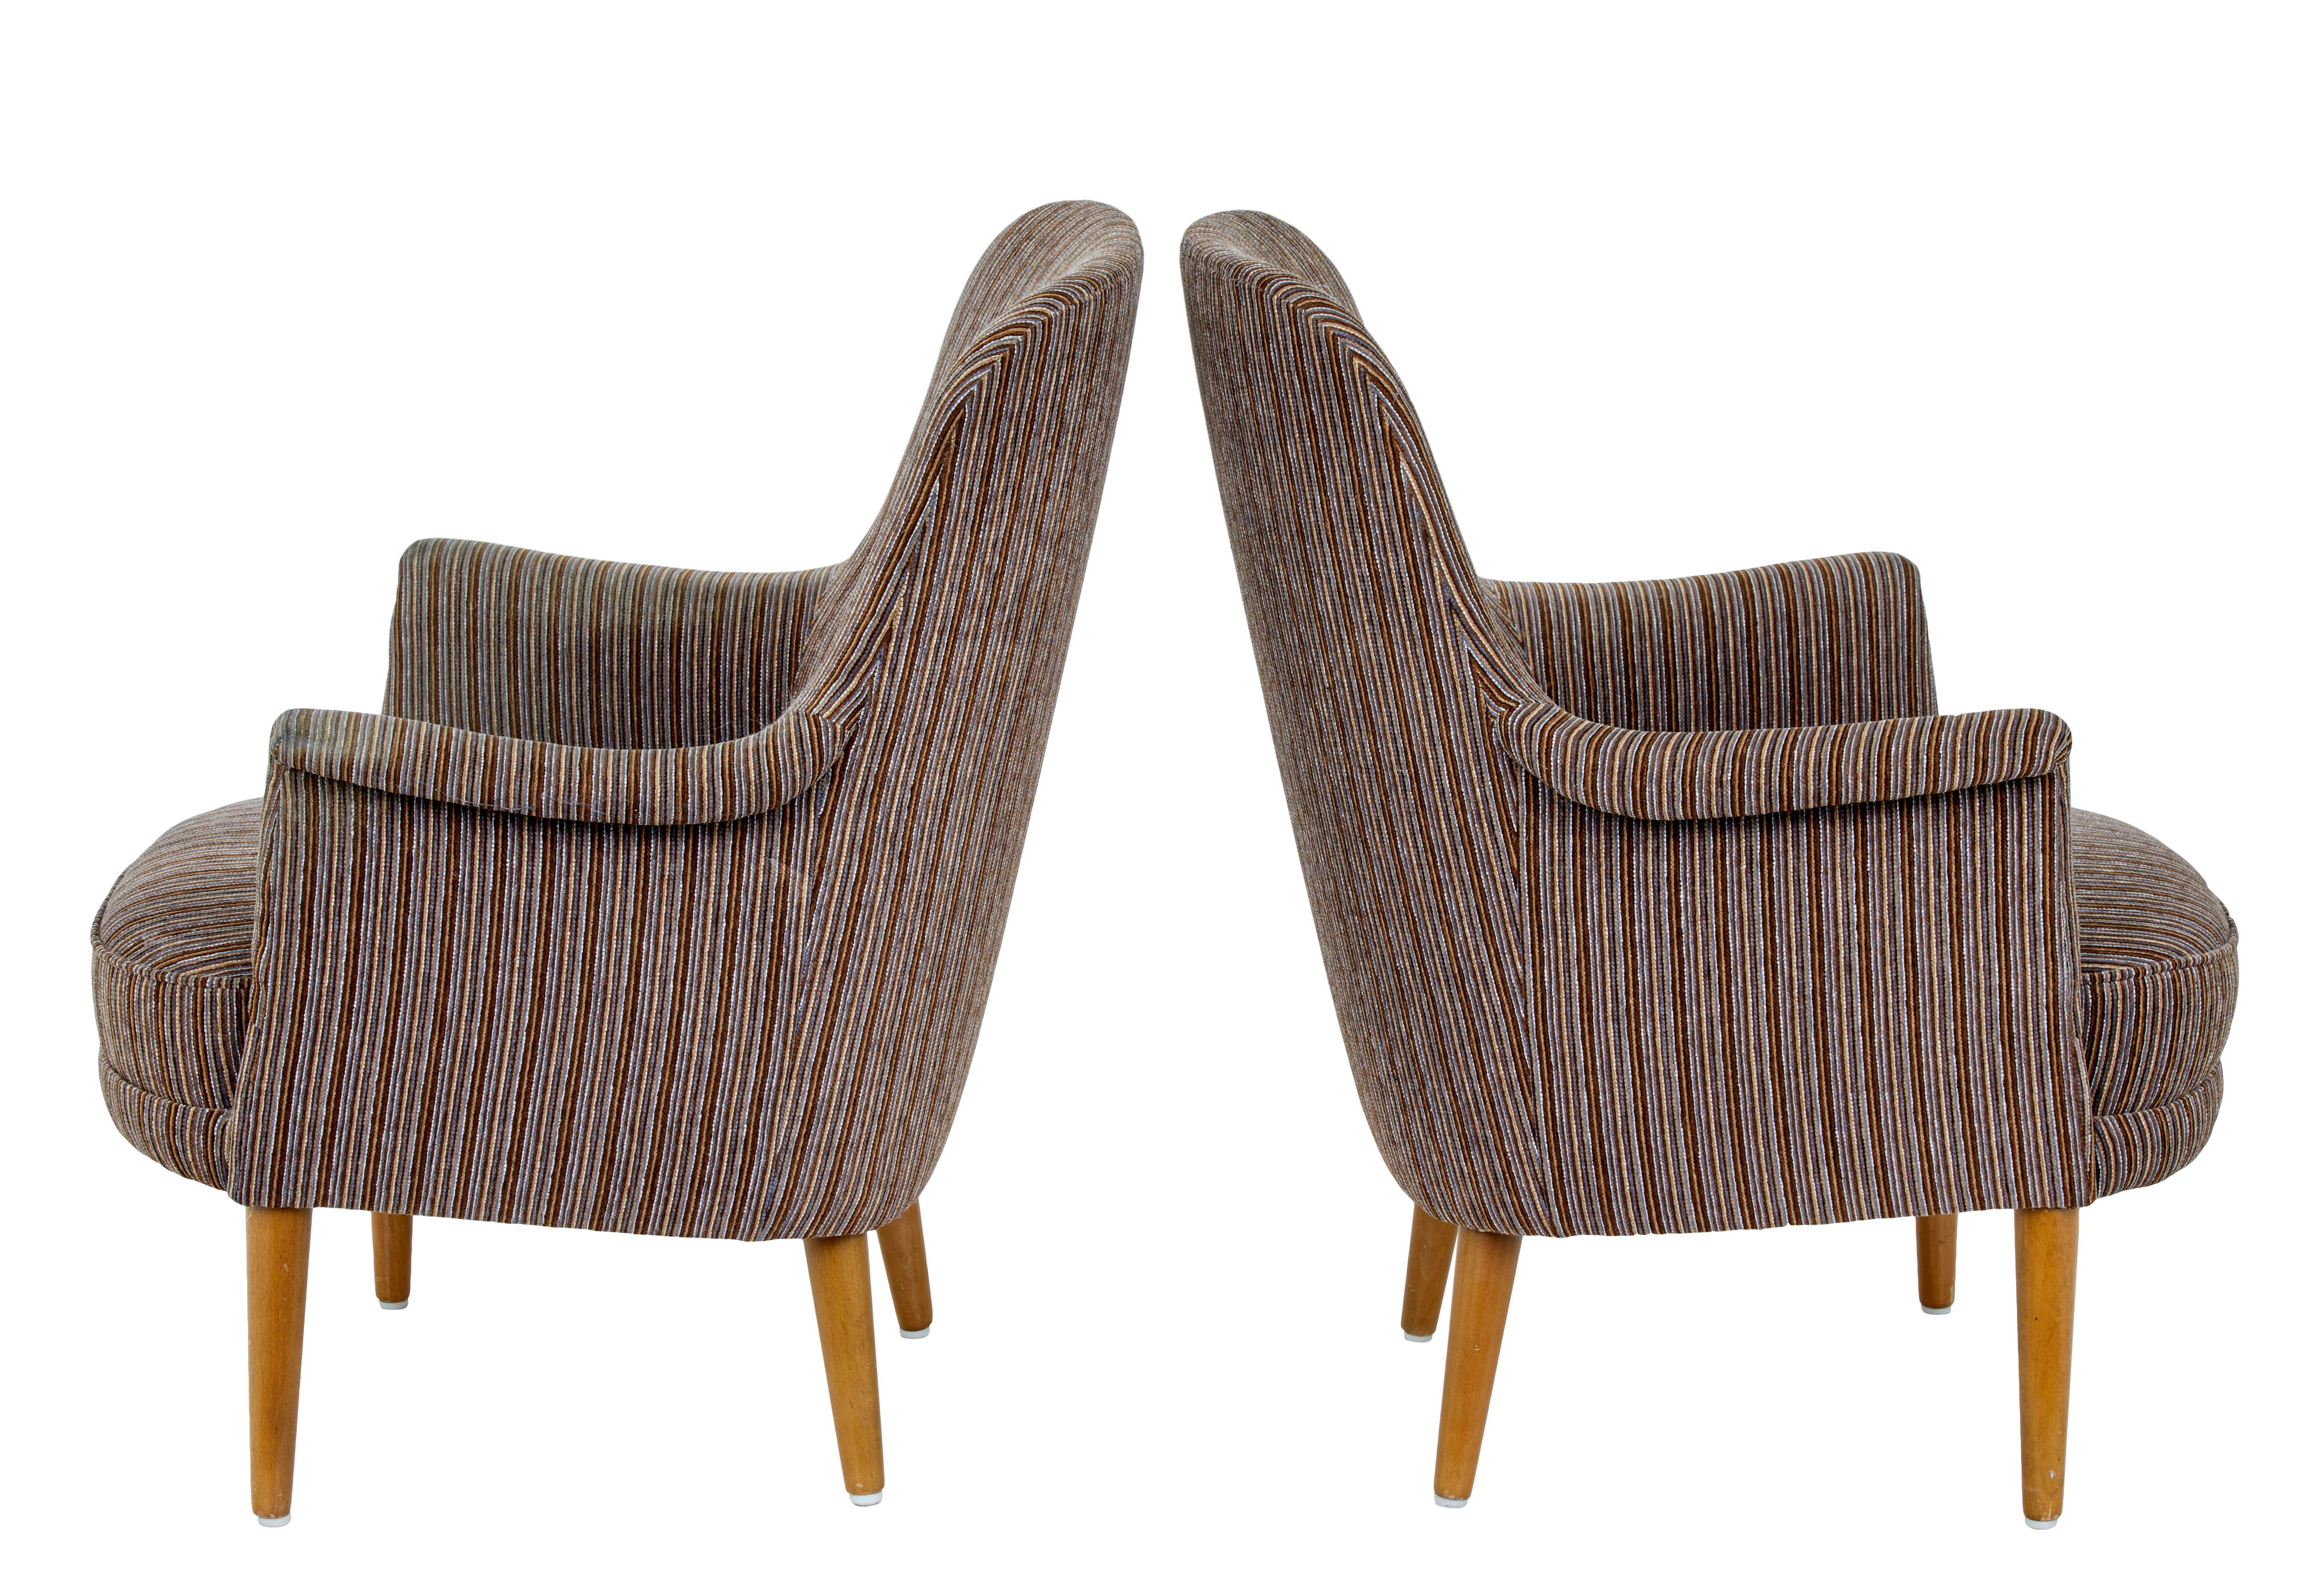 Fine pair of Carl Malmsten design 'husmor' armchairs from the 1960s.

Ab O.H.Sjogren were personally selected by Carl Malmsten to produce his chairs knowing they had a strong tradition in good quality craftmanship.

Comfortable easy chairs,